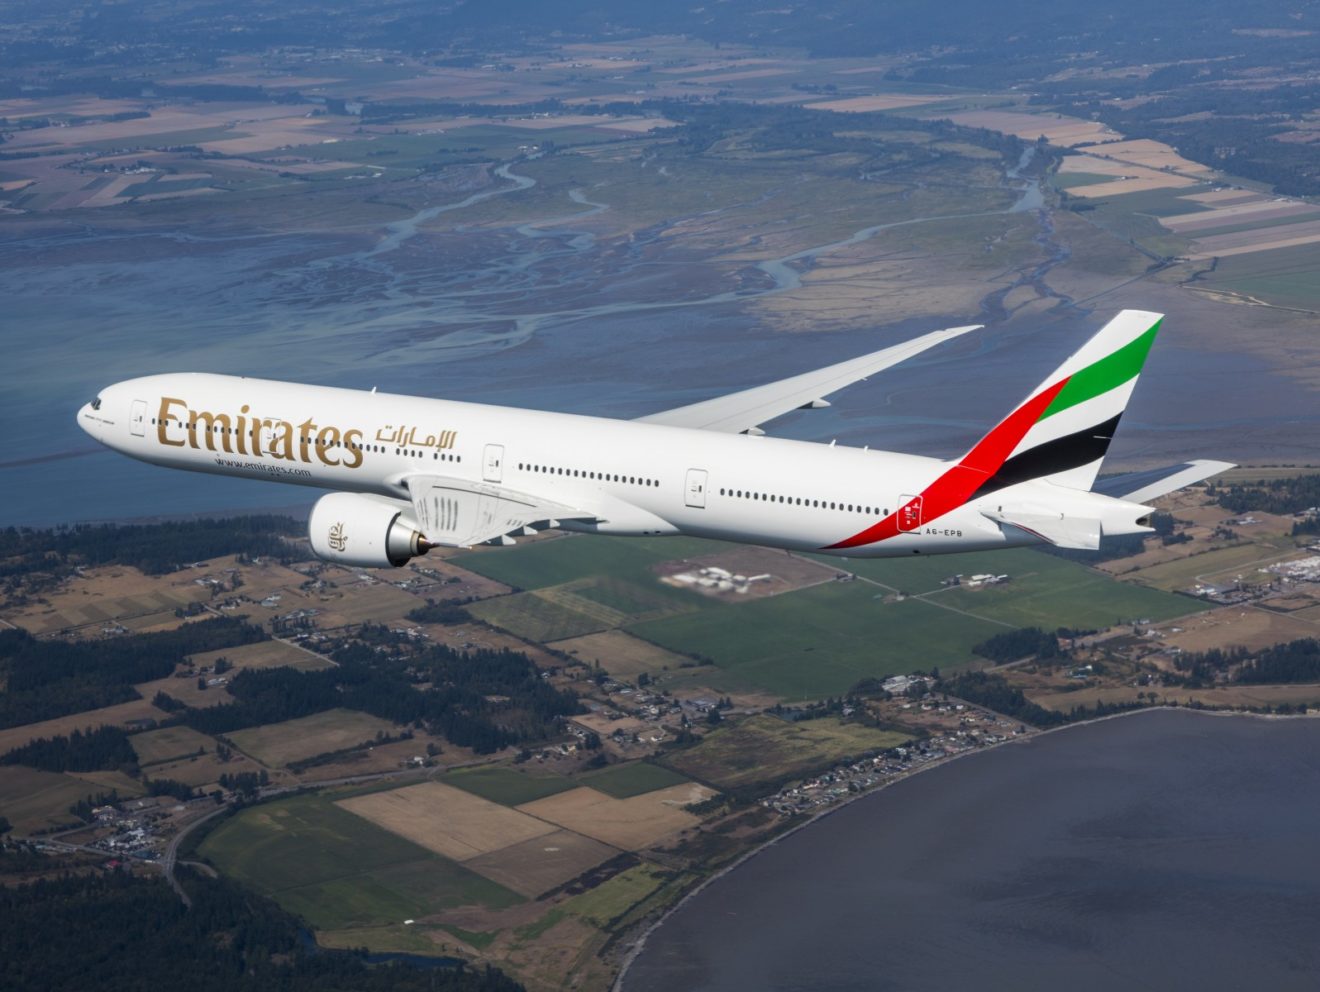 Emirates Group reports most profitable year ever with profit of US$ 2.9 billion